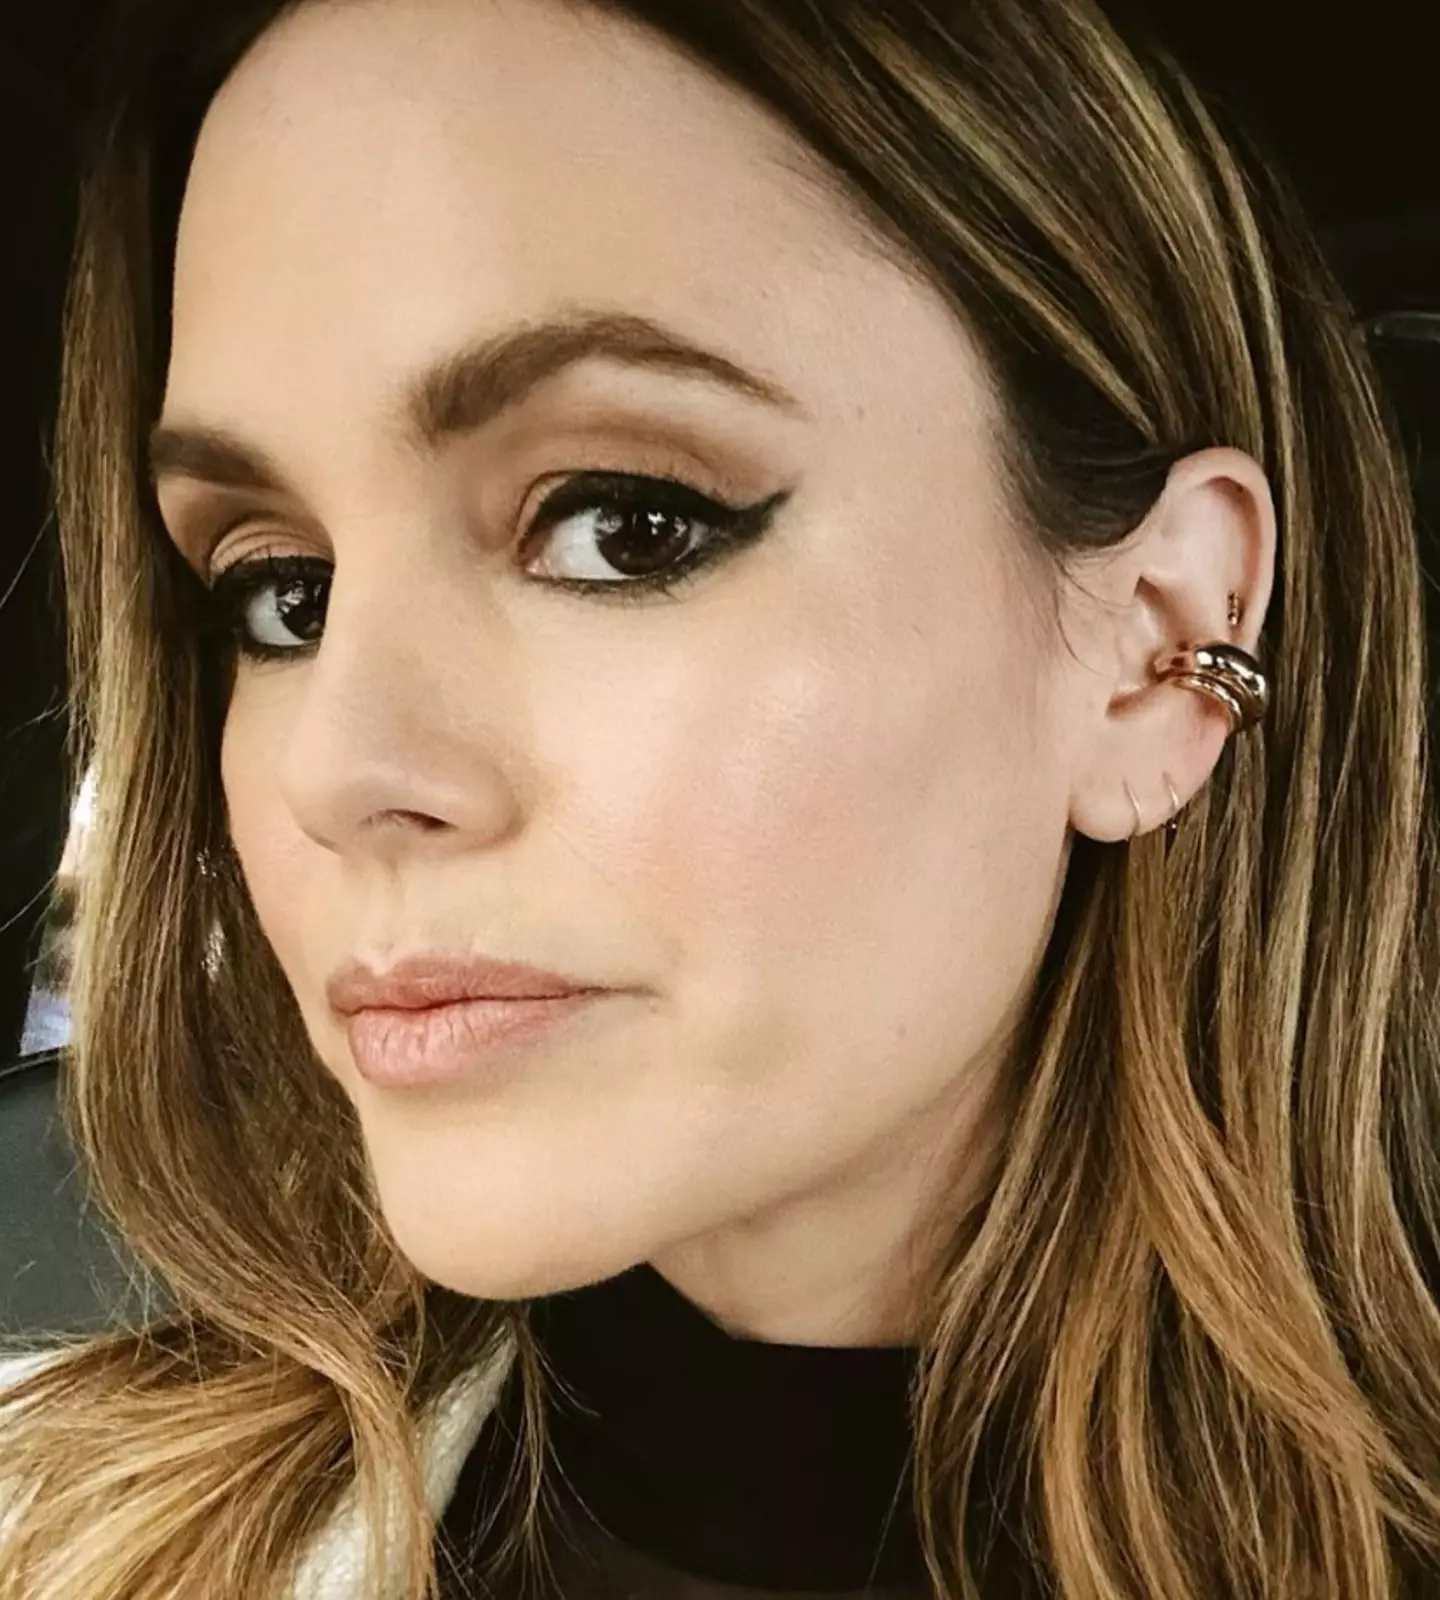 Rachel Bilson has said she wouldn't take back the comments about sex.